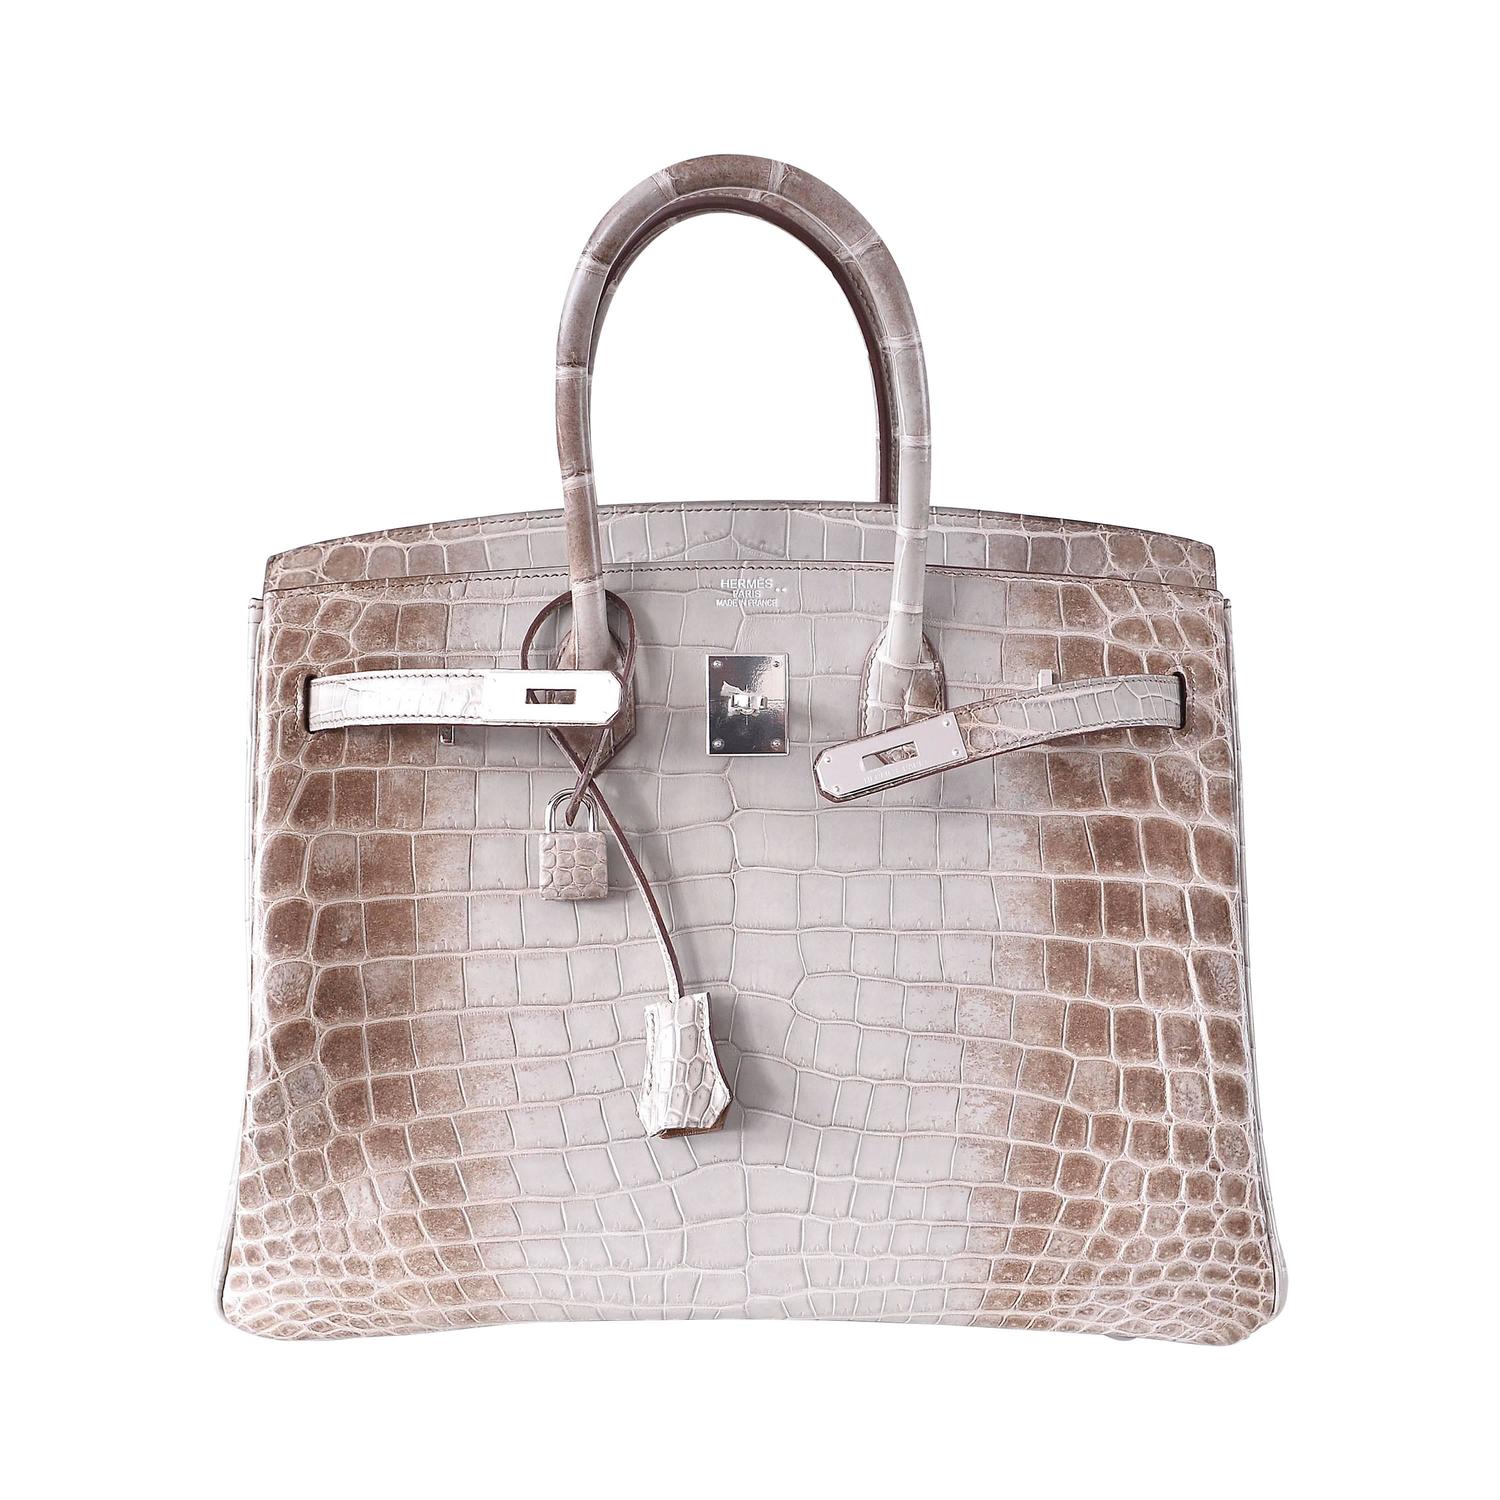 How Much Is Hermes Birkin Bag In Philippines | IQS Executive